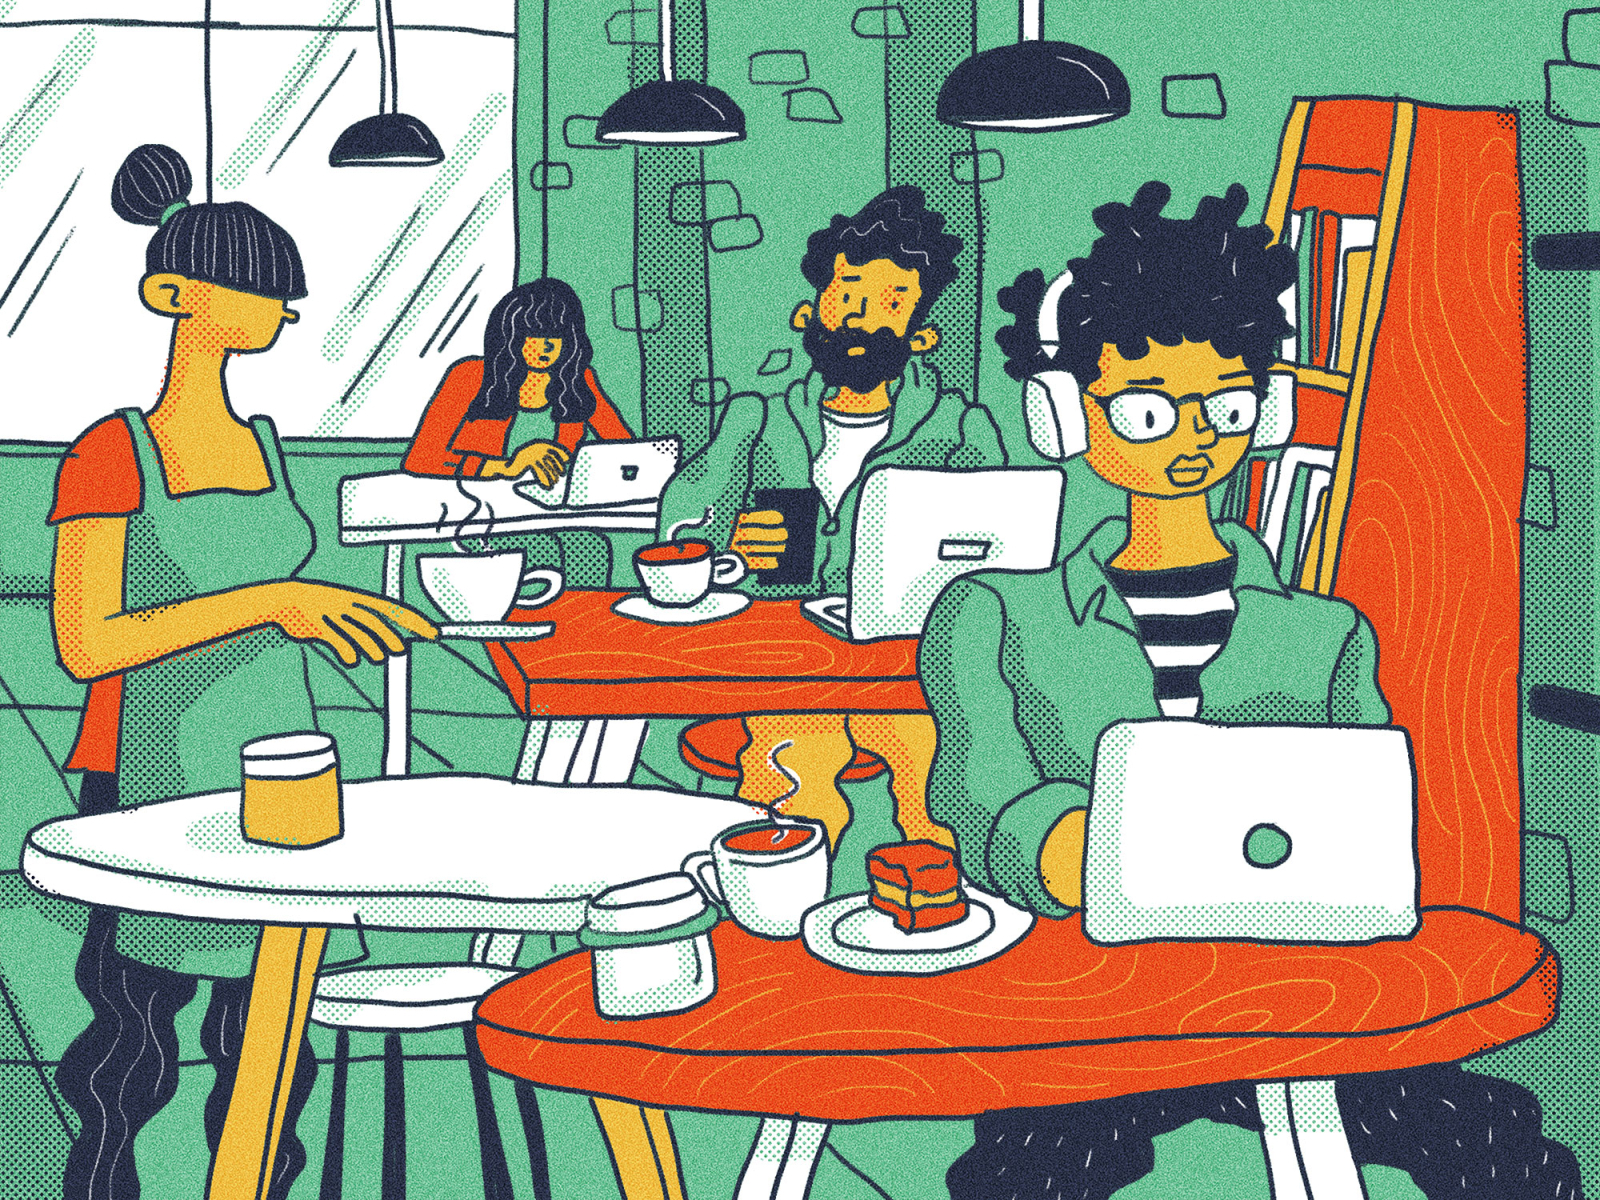 Coffee Shop by Allan Faustino on Dribbble